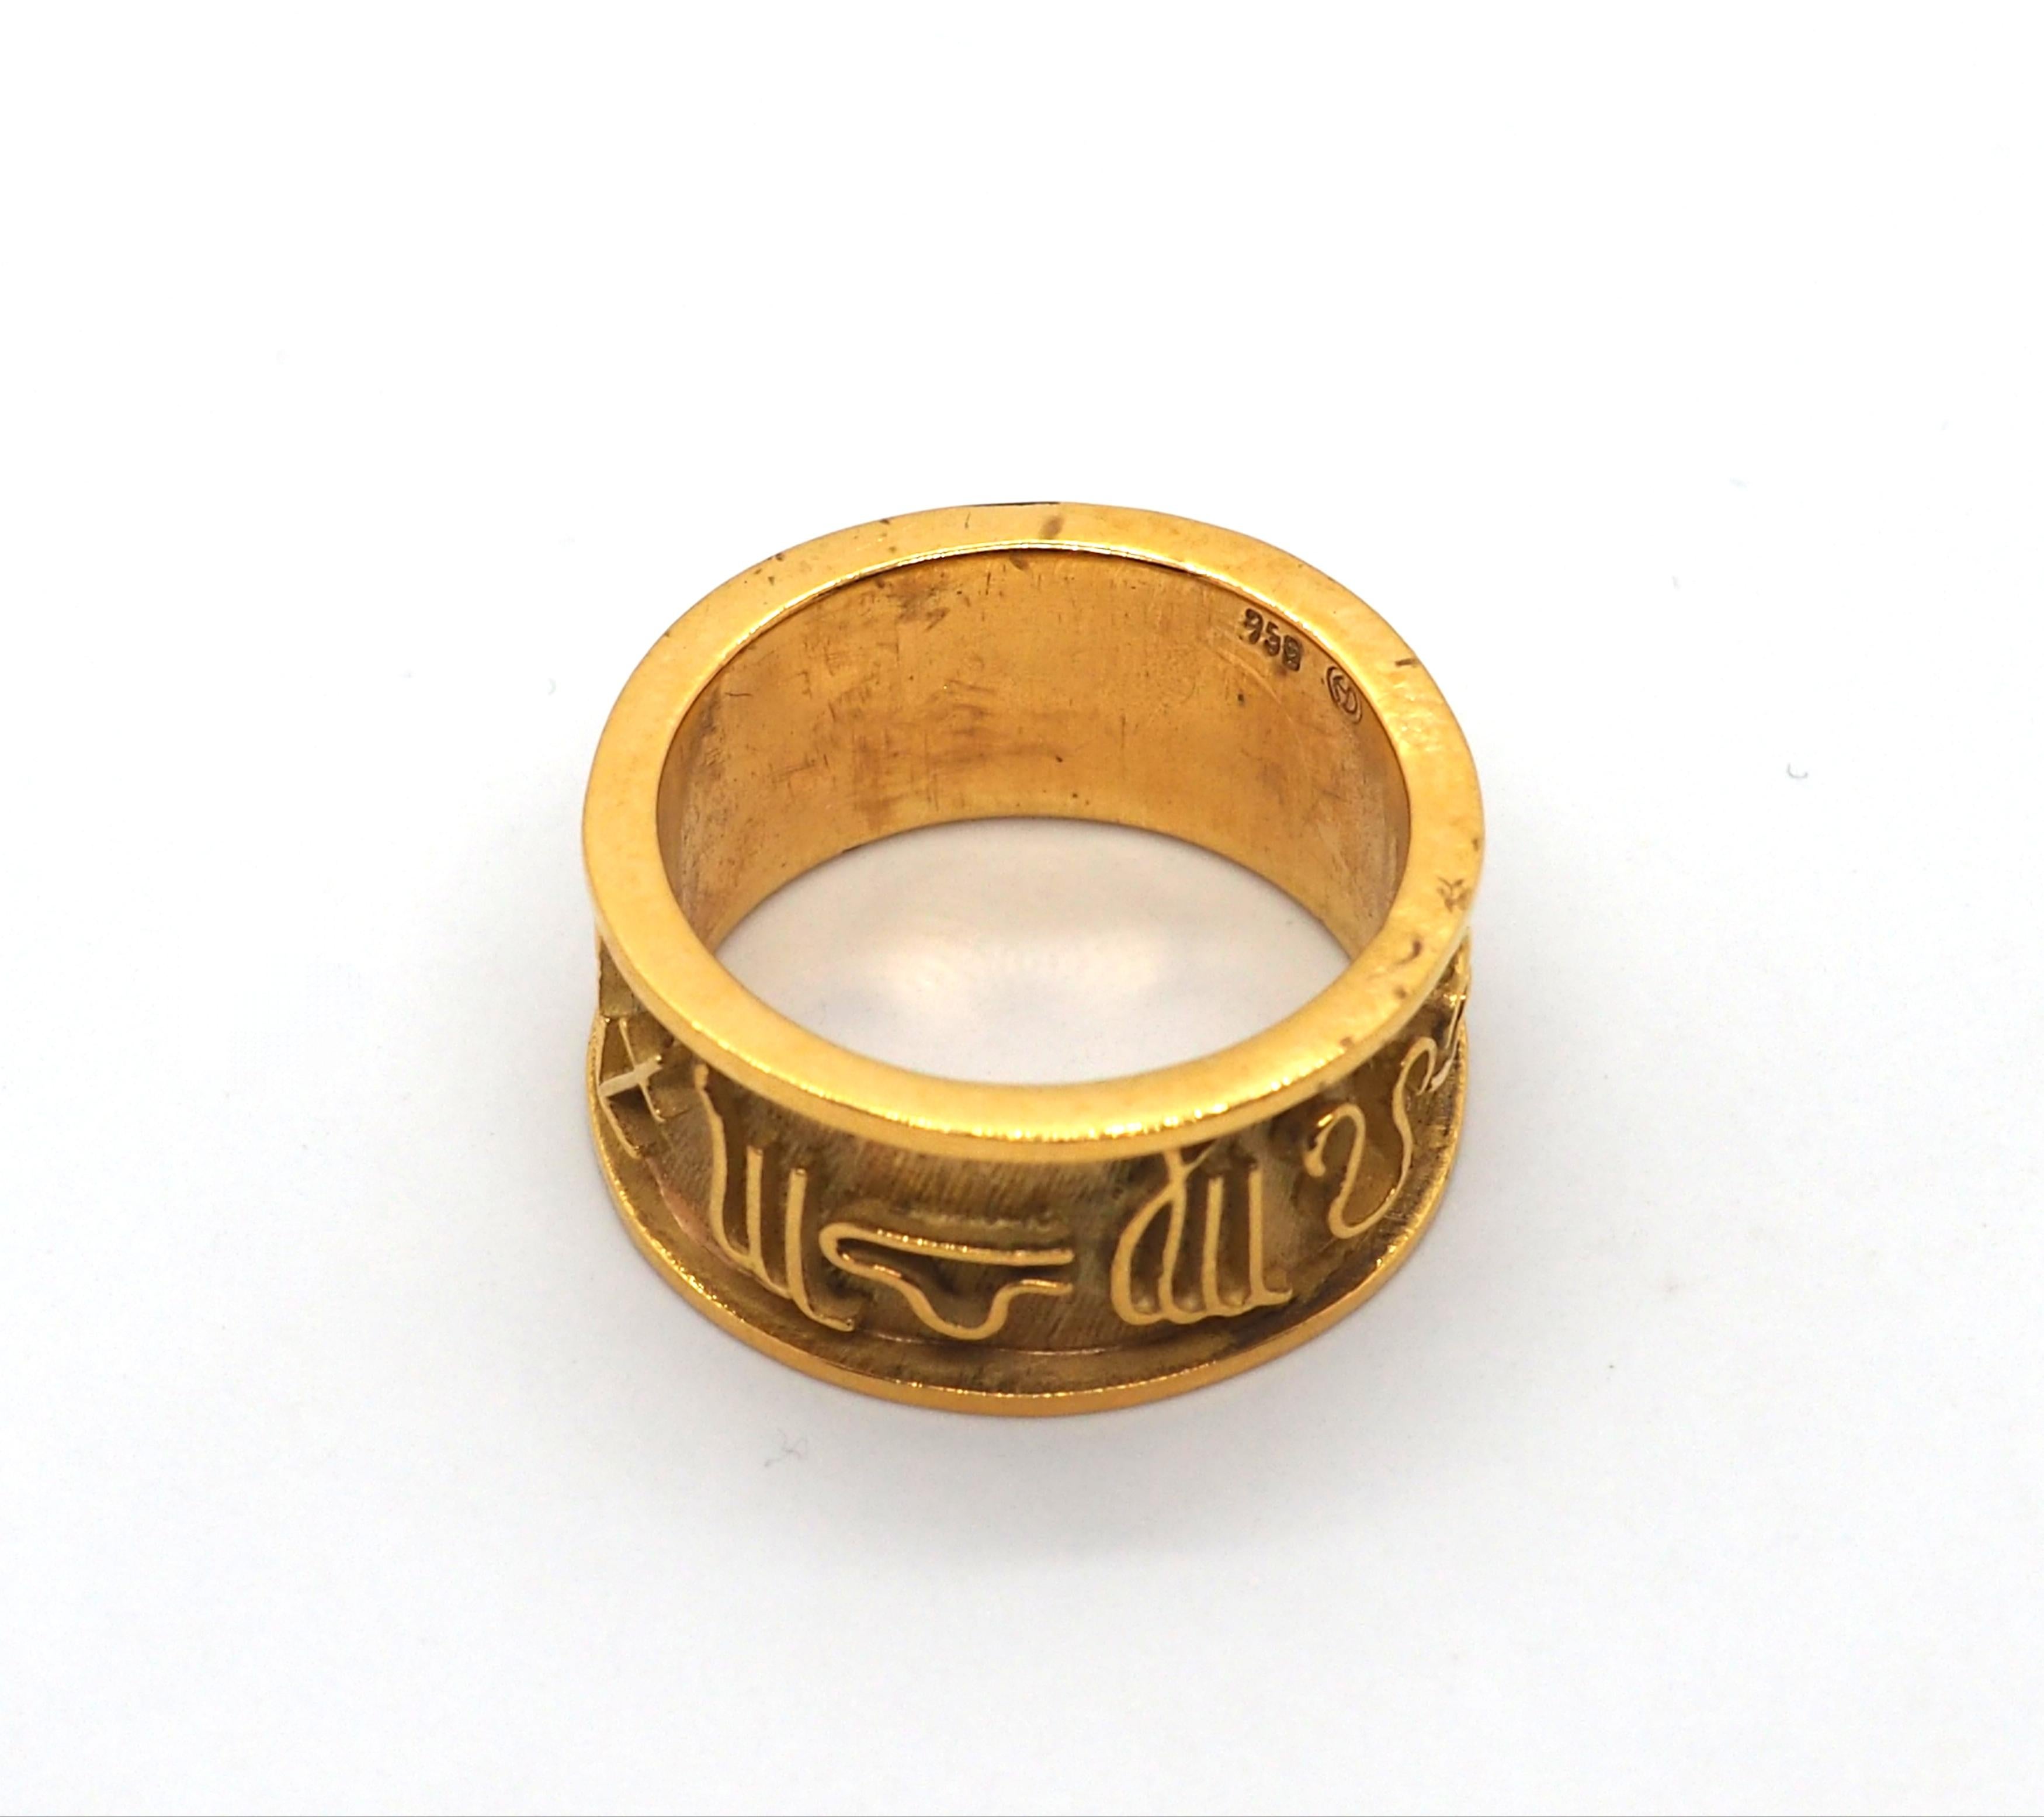 Embrace the timeless allure of vintage craftsmanship with this Gilbert Albert 18K yellow gold ring, featuring the twelve astrological signs. Each intricately detailed sign is a testament to Gilbert Albert's artistic vision and mastery.

Crafted with